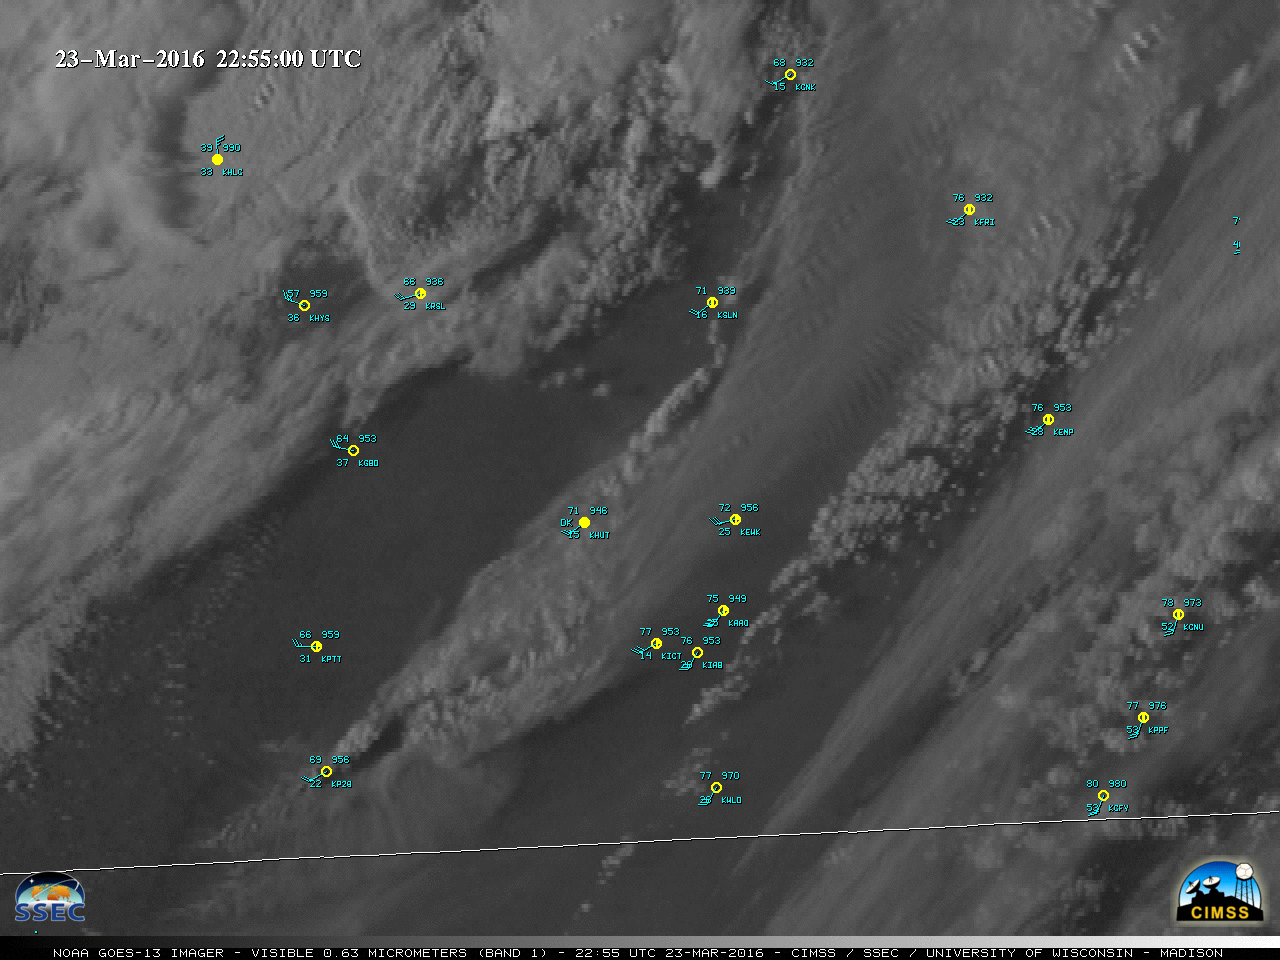 GOES-13 Visible (0.63 µm) images, with surface reports [click to play animation]